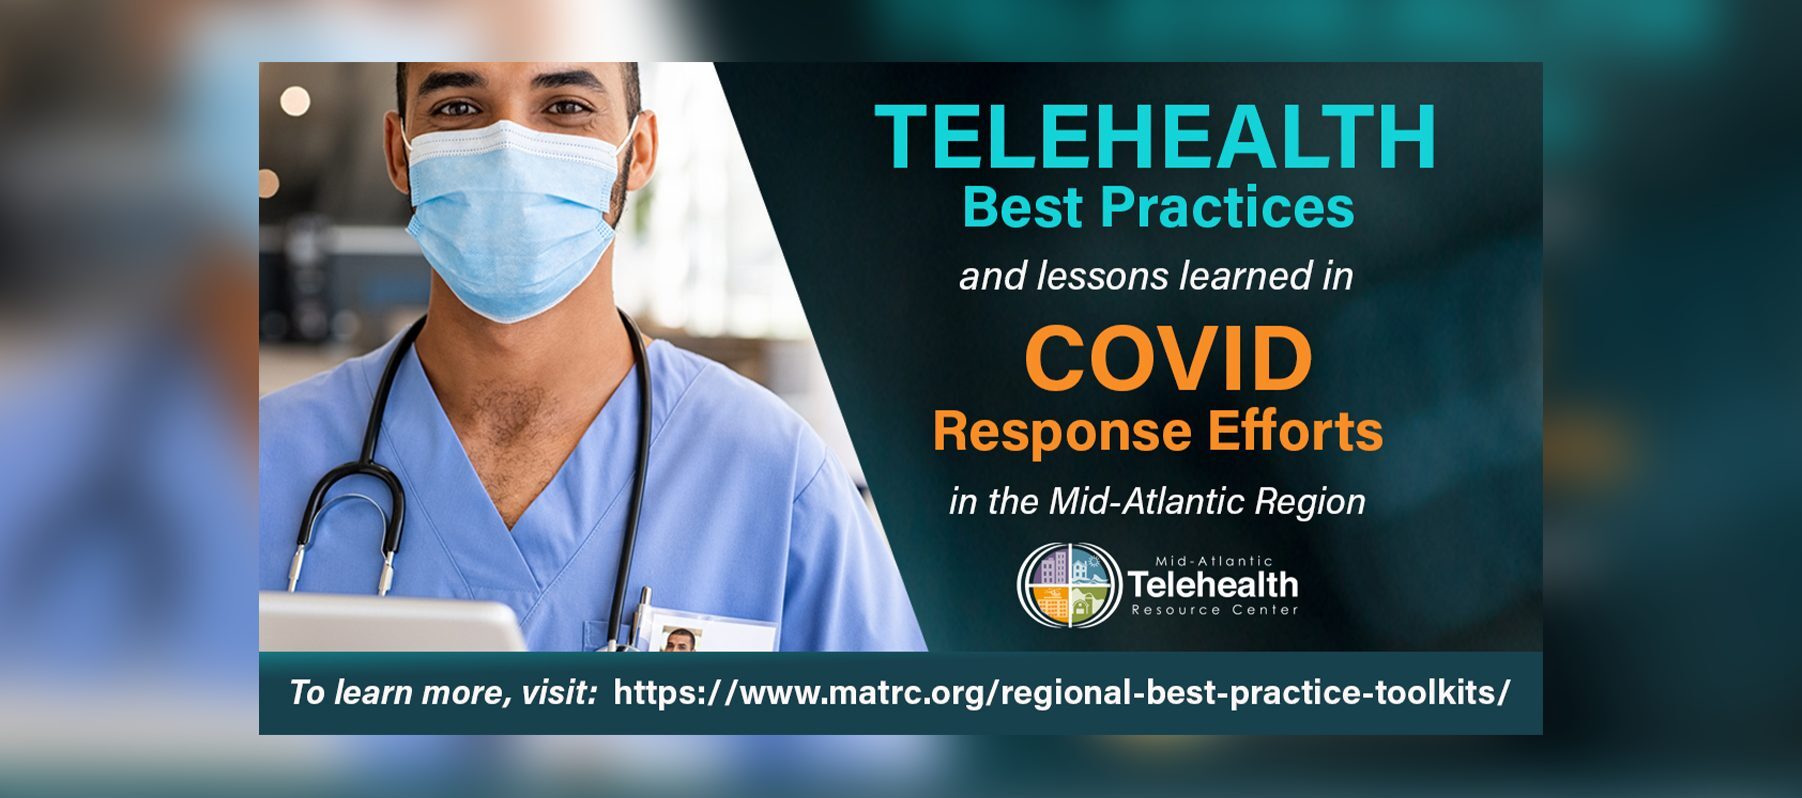 Telehealth Best Practices for COVID Response